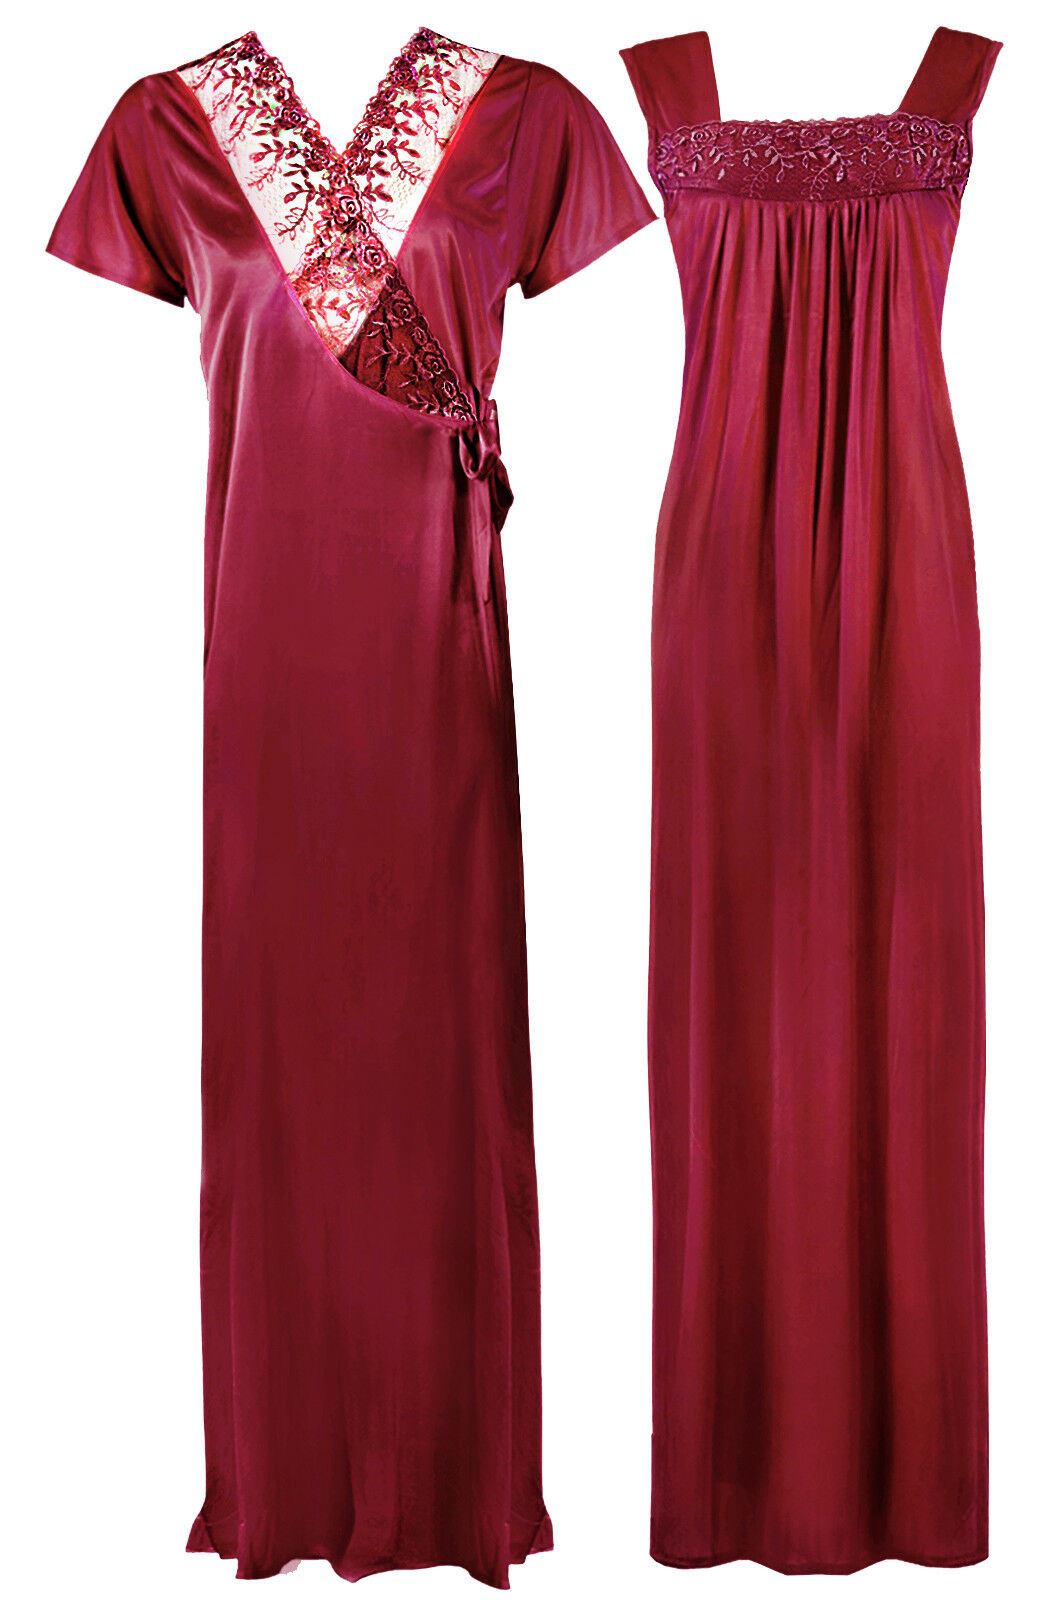 Cerise / One Size WOMENS LONG SATIN CHEMISE NIGHTIE NIGHTDRESS LADIES DRESSING GOWN 2PC SET 8-16 The Orange Tags